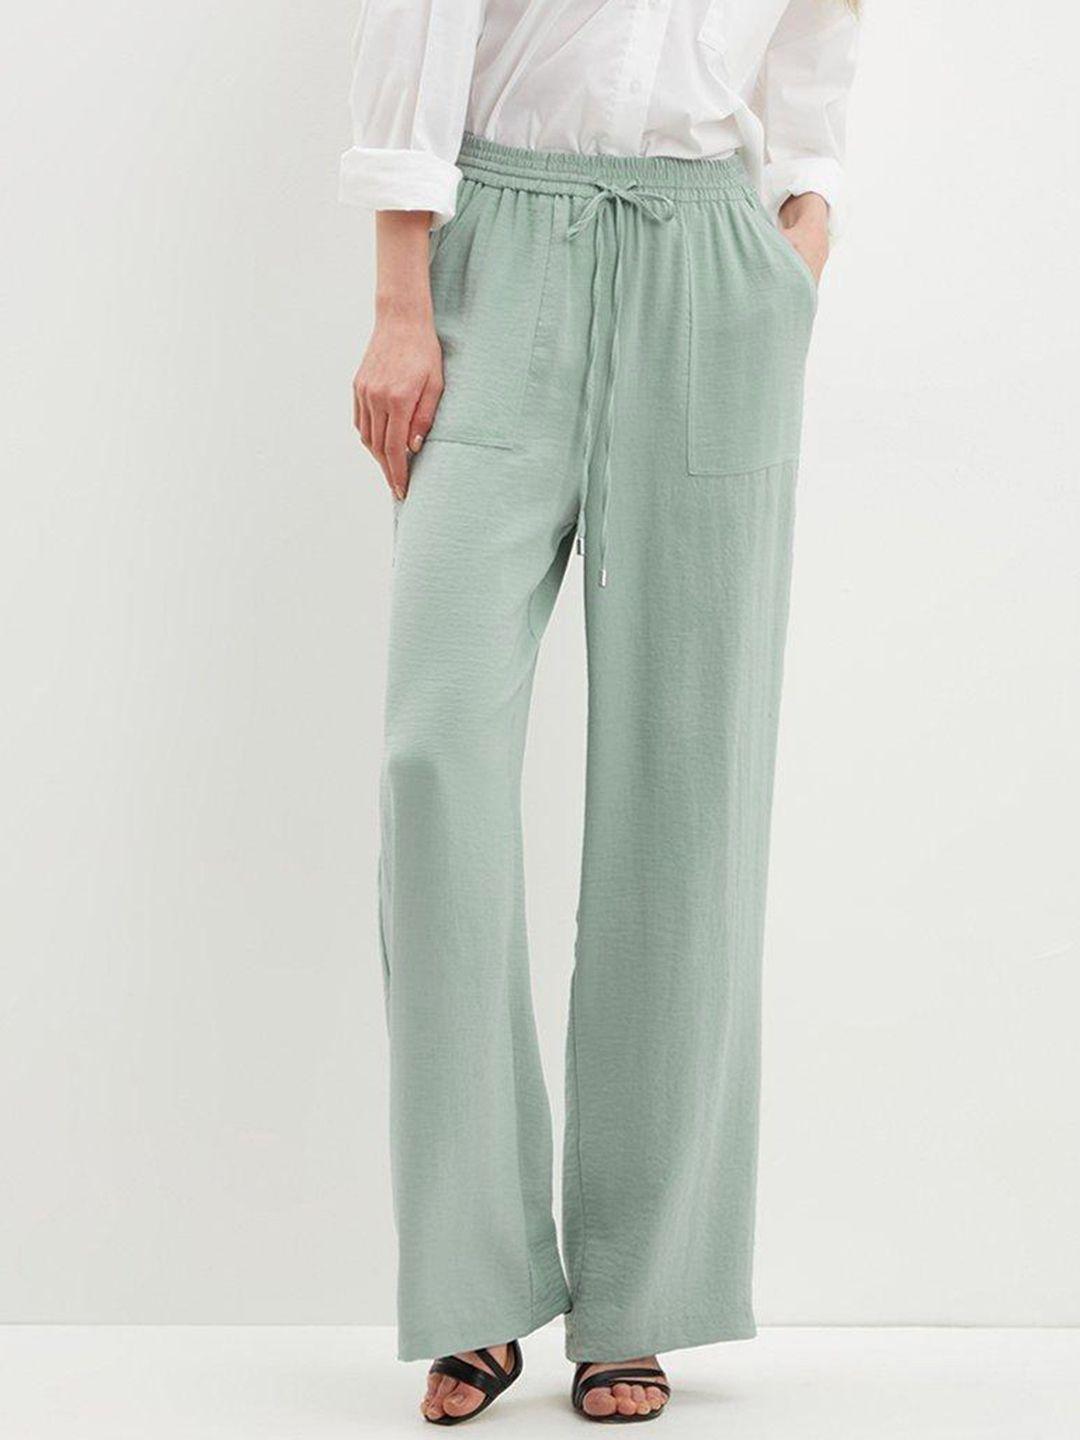 dorothy perkins women sage green solid wide leg trousers